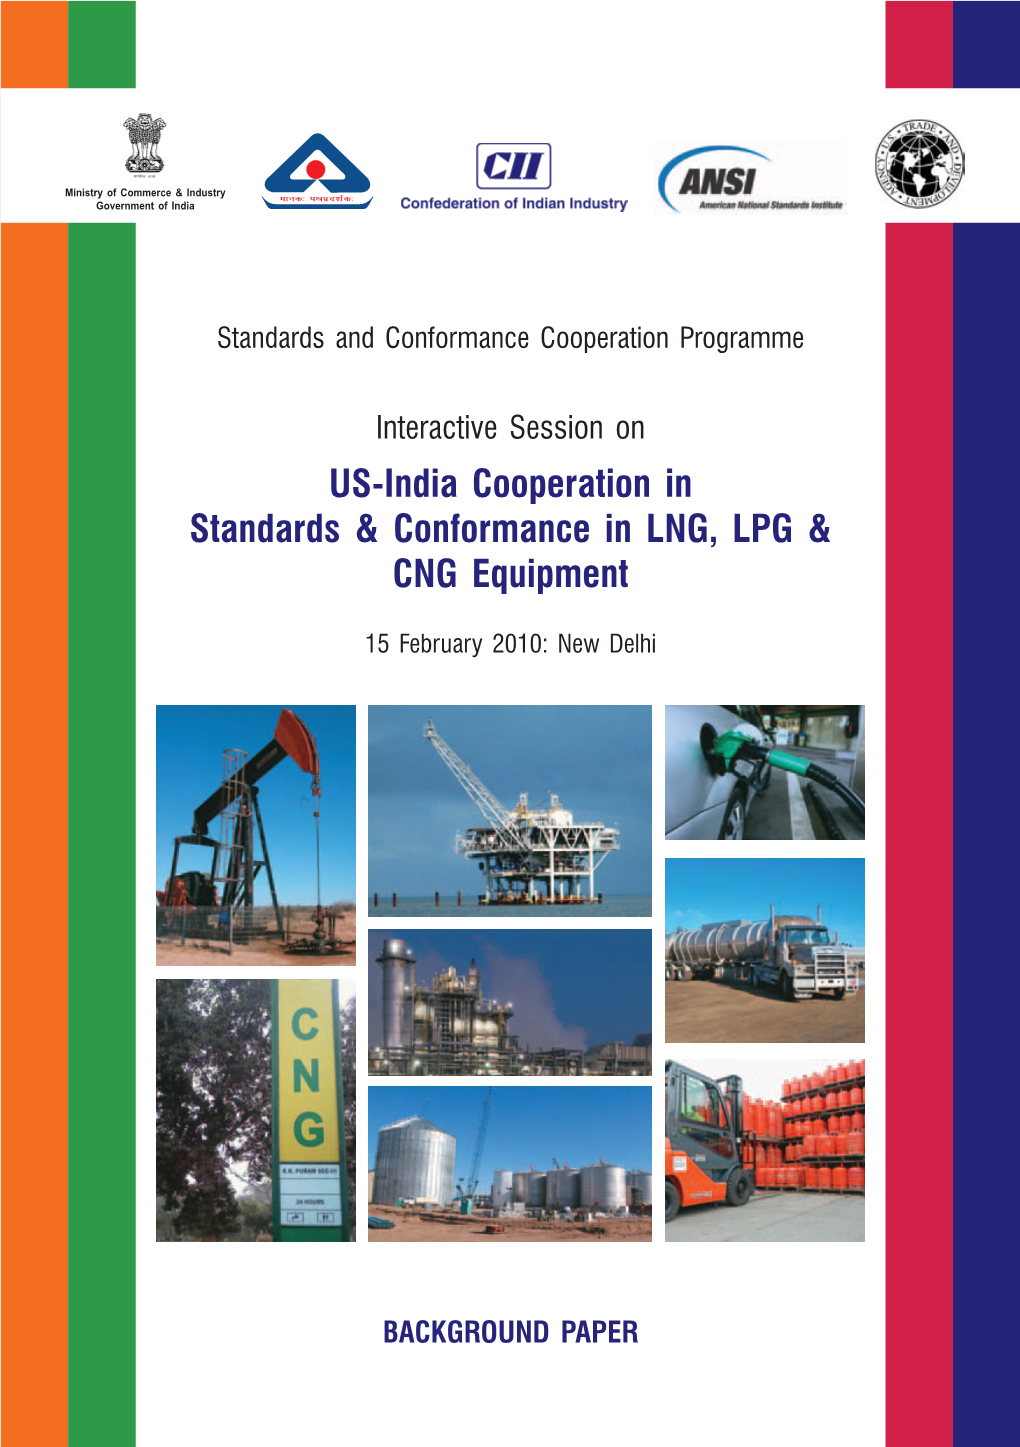 US-India Cooperation in Standards & Conformance in LNG, LPG & CNG